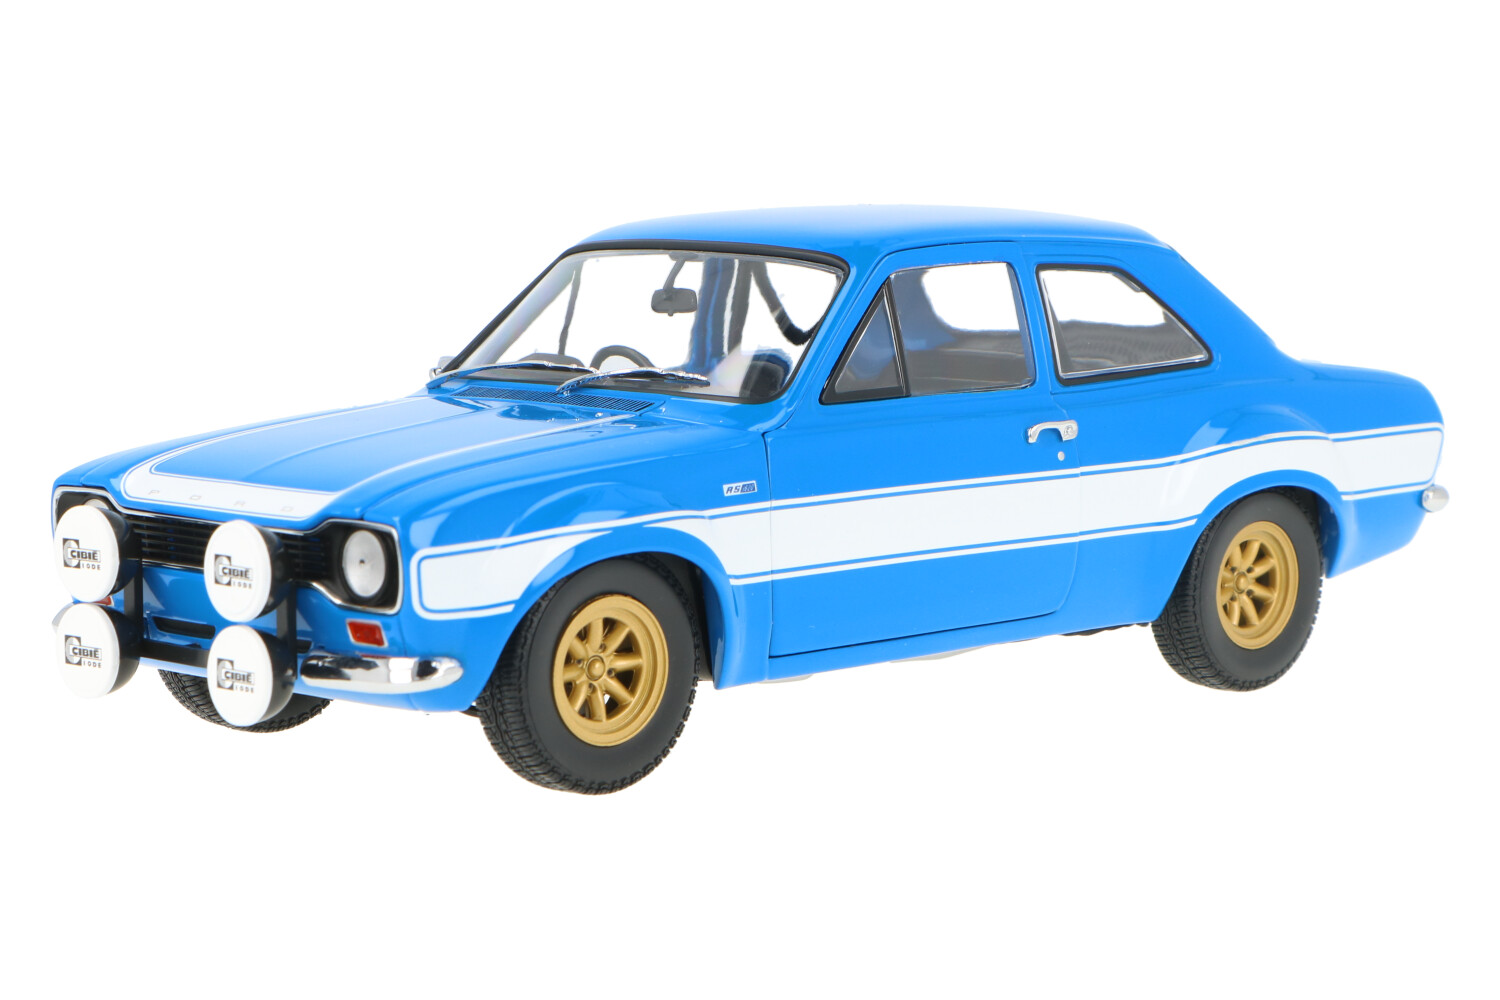 Ford-Escort-RS-1600-100688102_13154012138120365Ford-Escort-RS-1600-100688102_Houseofmodelcars_.jpg